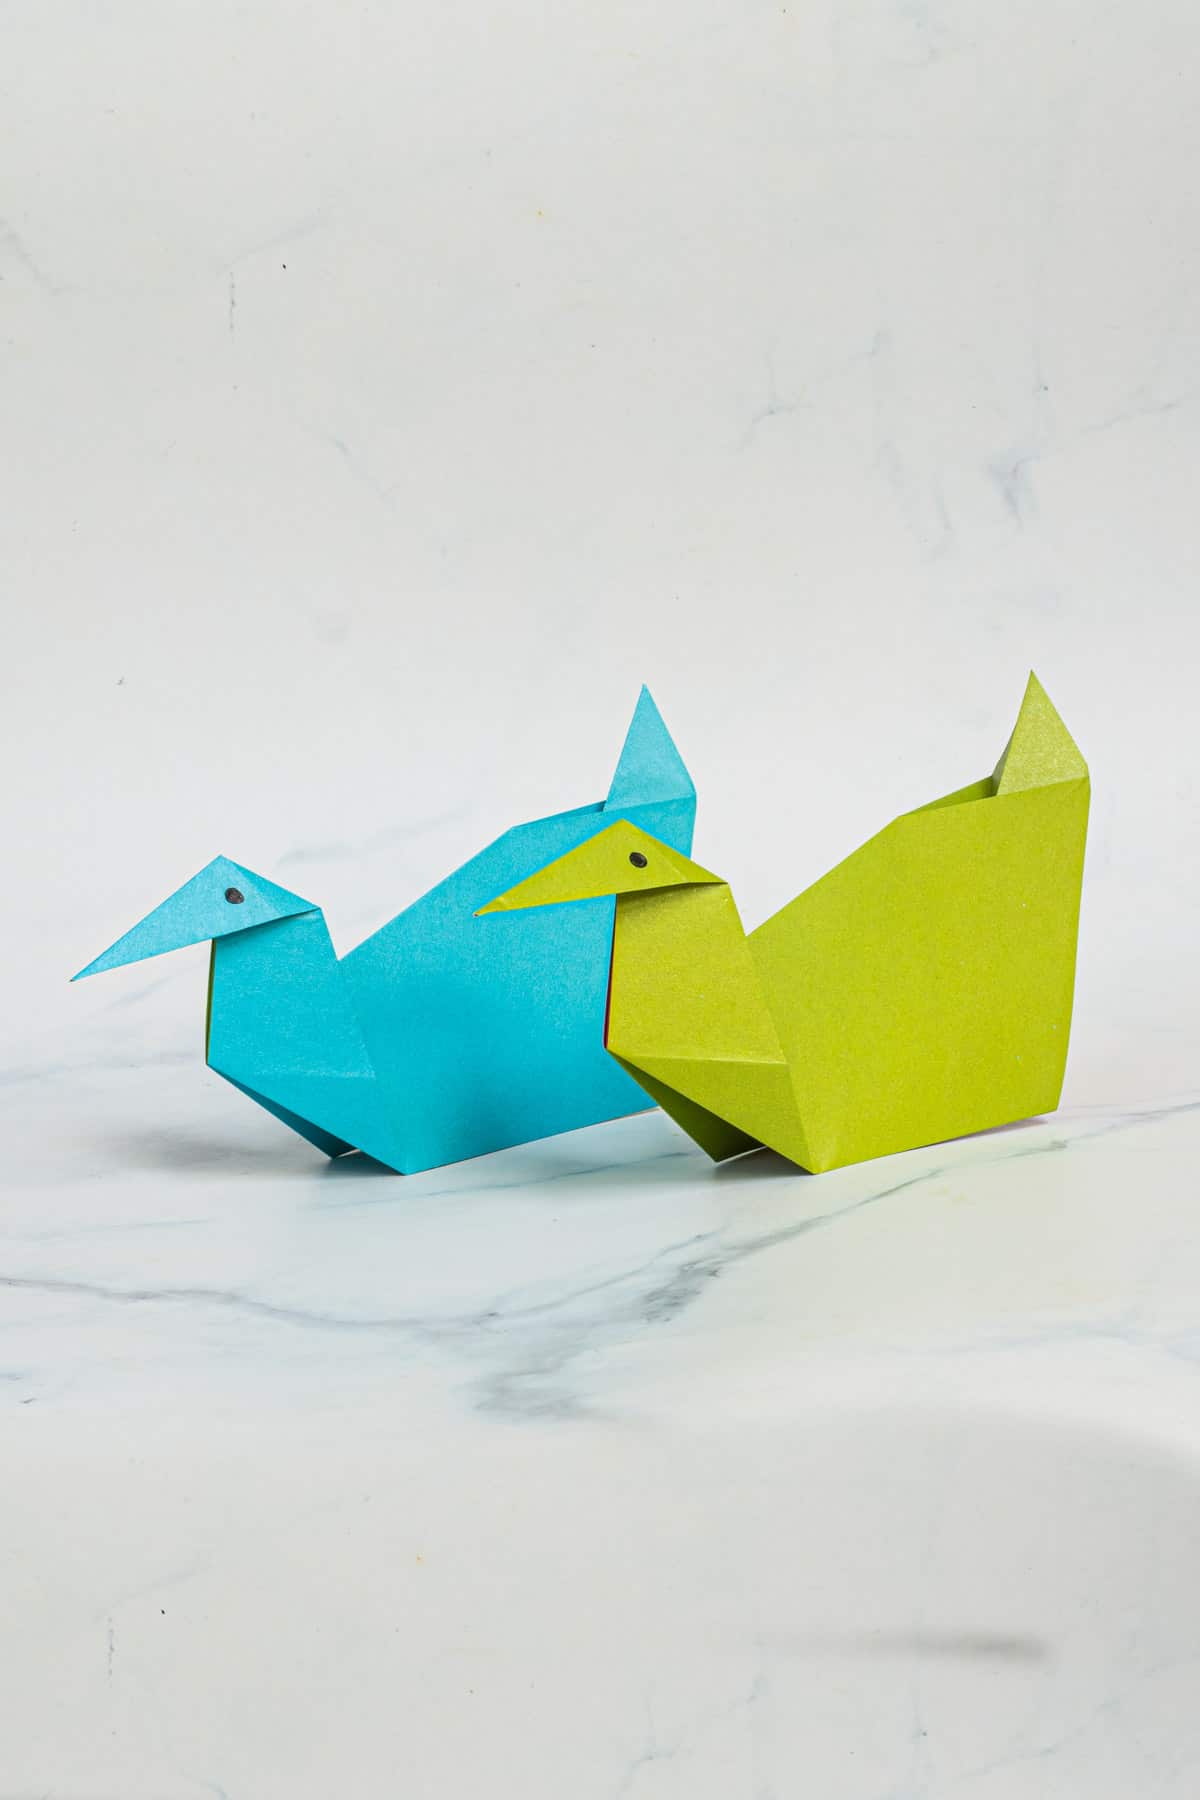 2 paper ducks against a marble background.